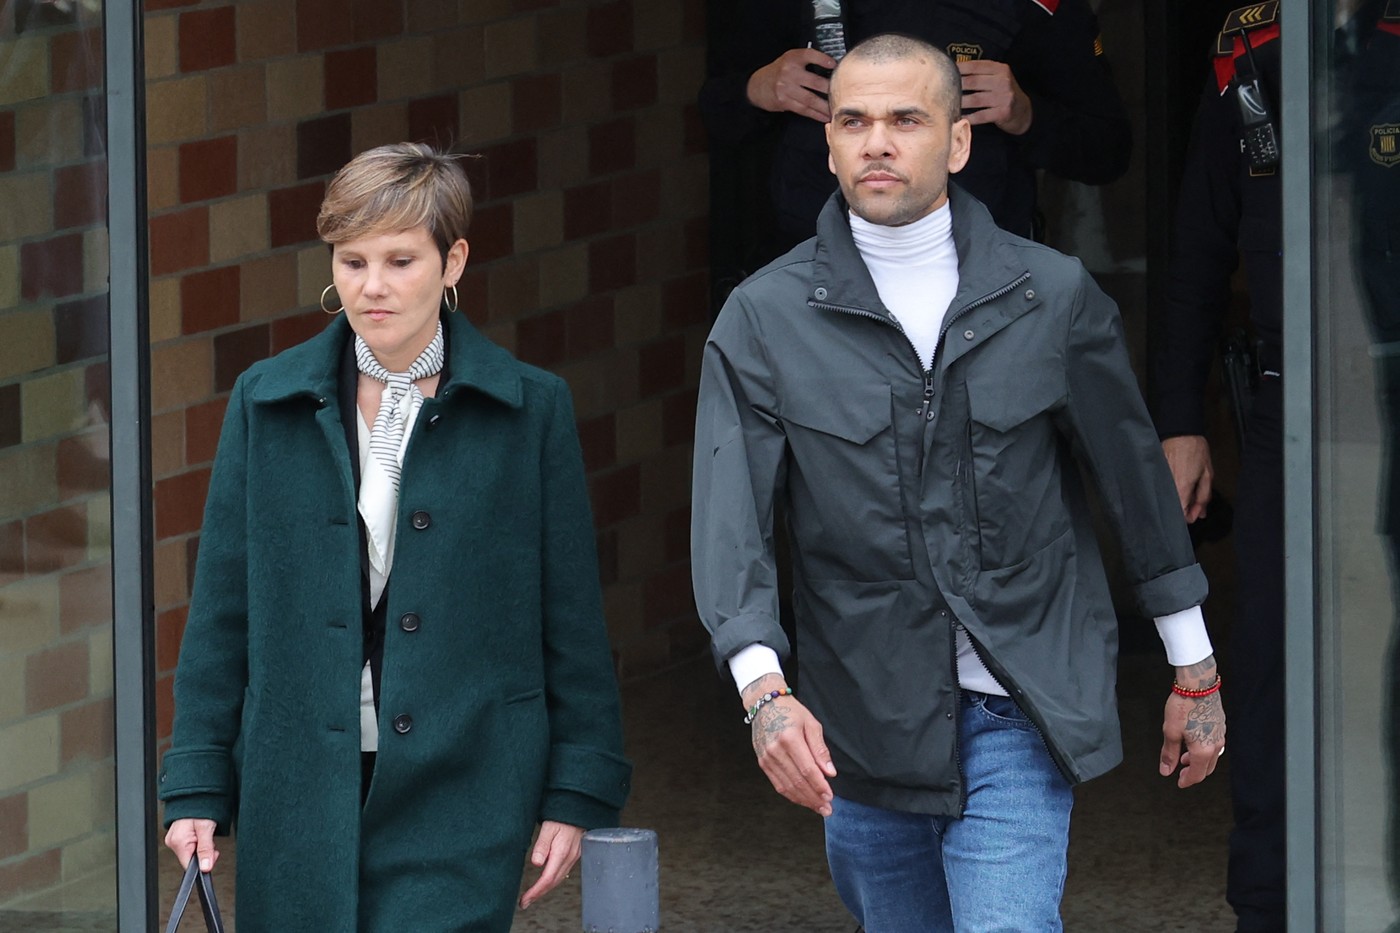 Convicted rapist and former Brazil international football player Dani Alves (R) leaves on provisional release, flanked by his lawyers Ines Guardiola, at Brians 2 prison in Barcelona on March 25, 2024. Convicted rapist and former Brazil international Dani Alves left a jail in Barcelona on March 25, 2024 after posting the one-million-euro bail set by a Barcelona court to ensure his release pending appeal. Ex-Brazil star has been sentenced to 4.5 years in jail for rape on February 22, 2024.,Image: 859474354, License: Rights-managed, Restrictions: , Model Release: no